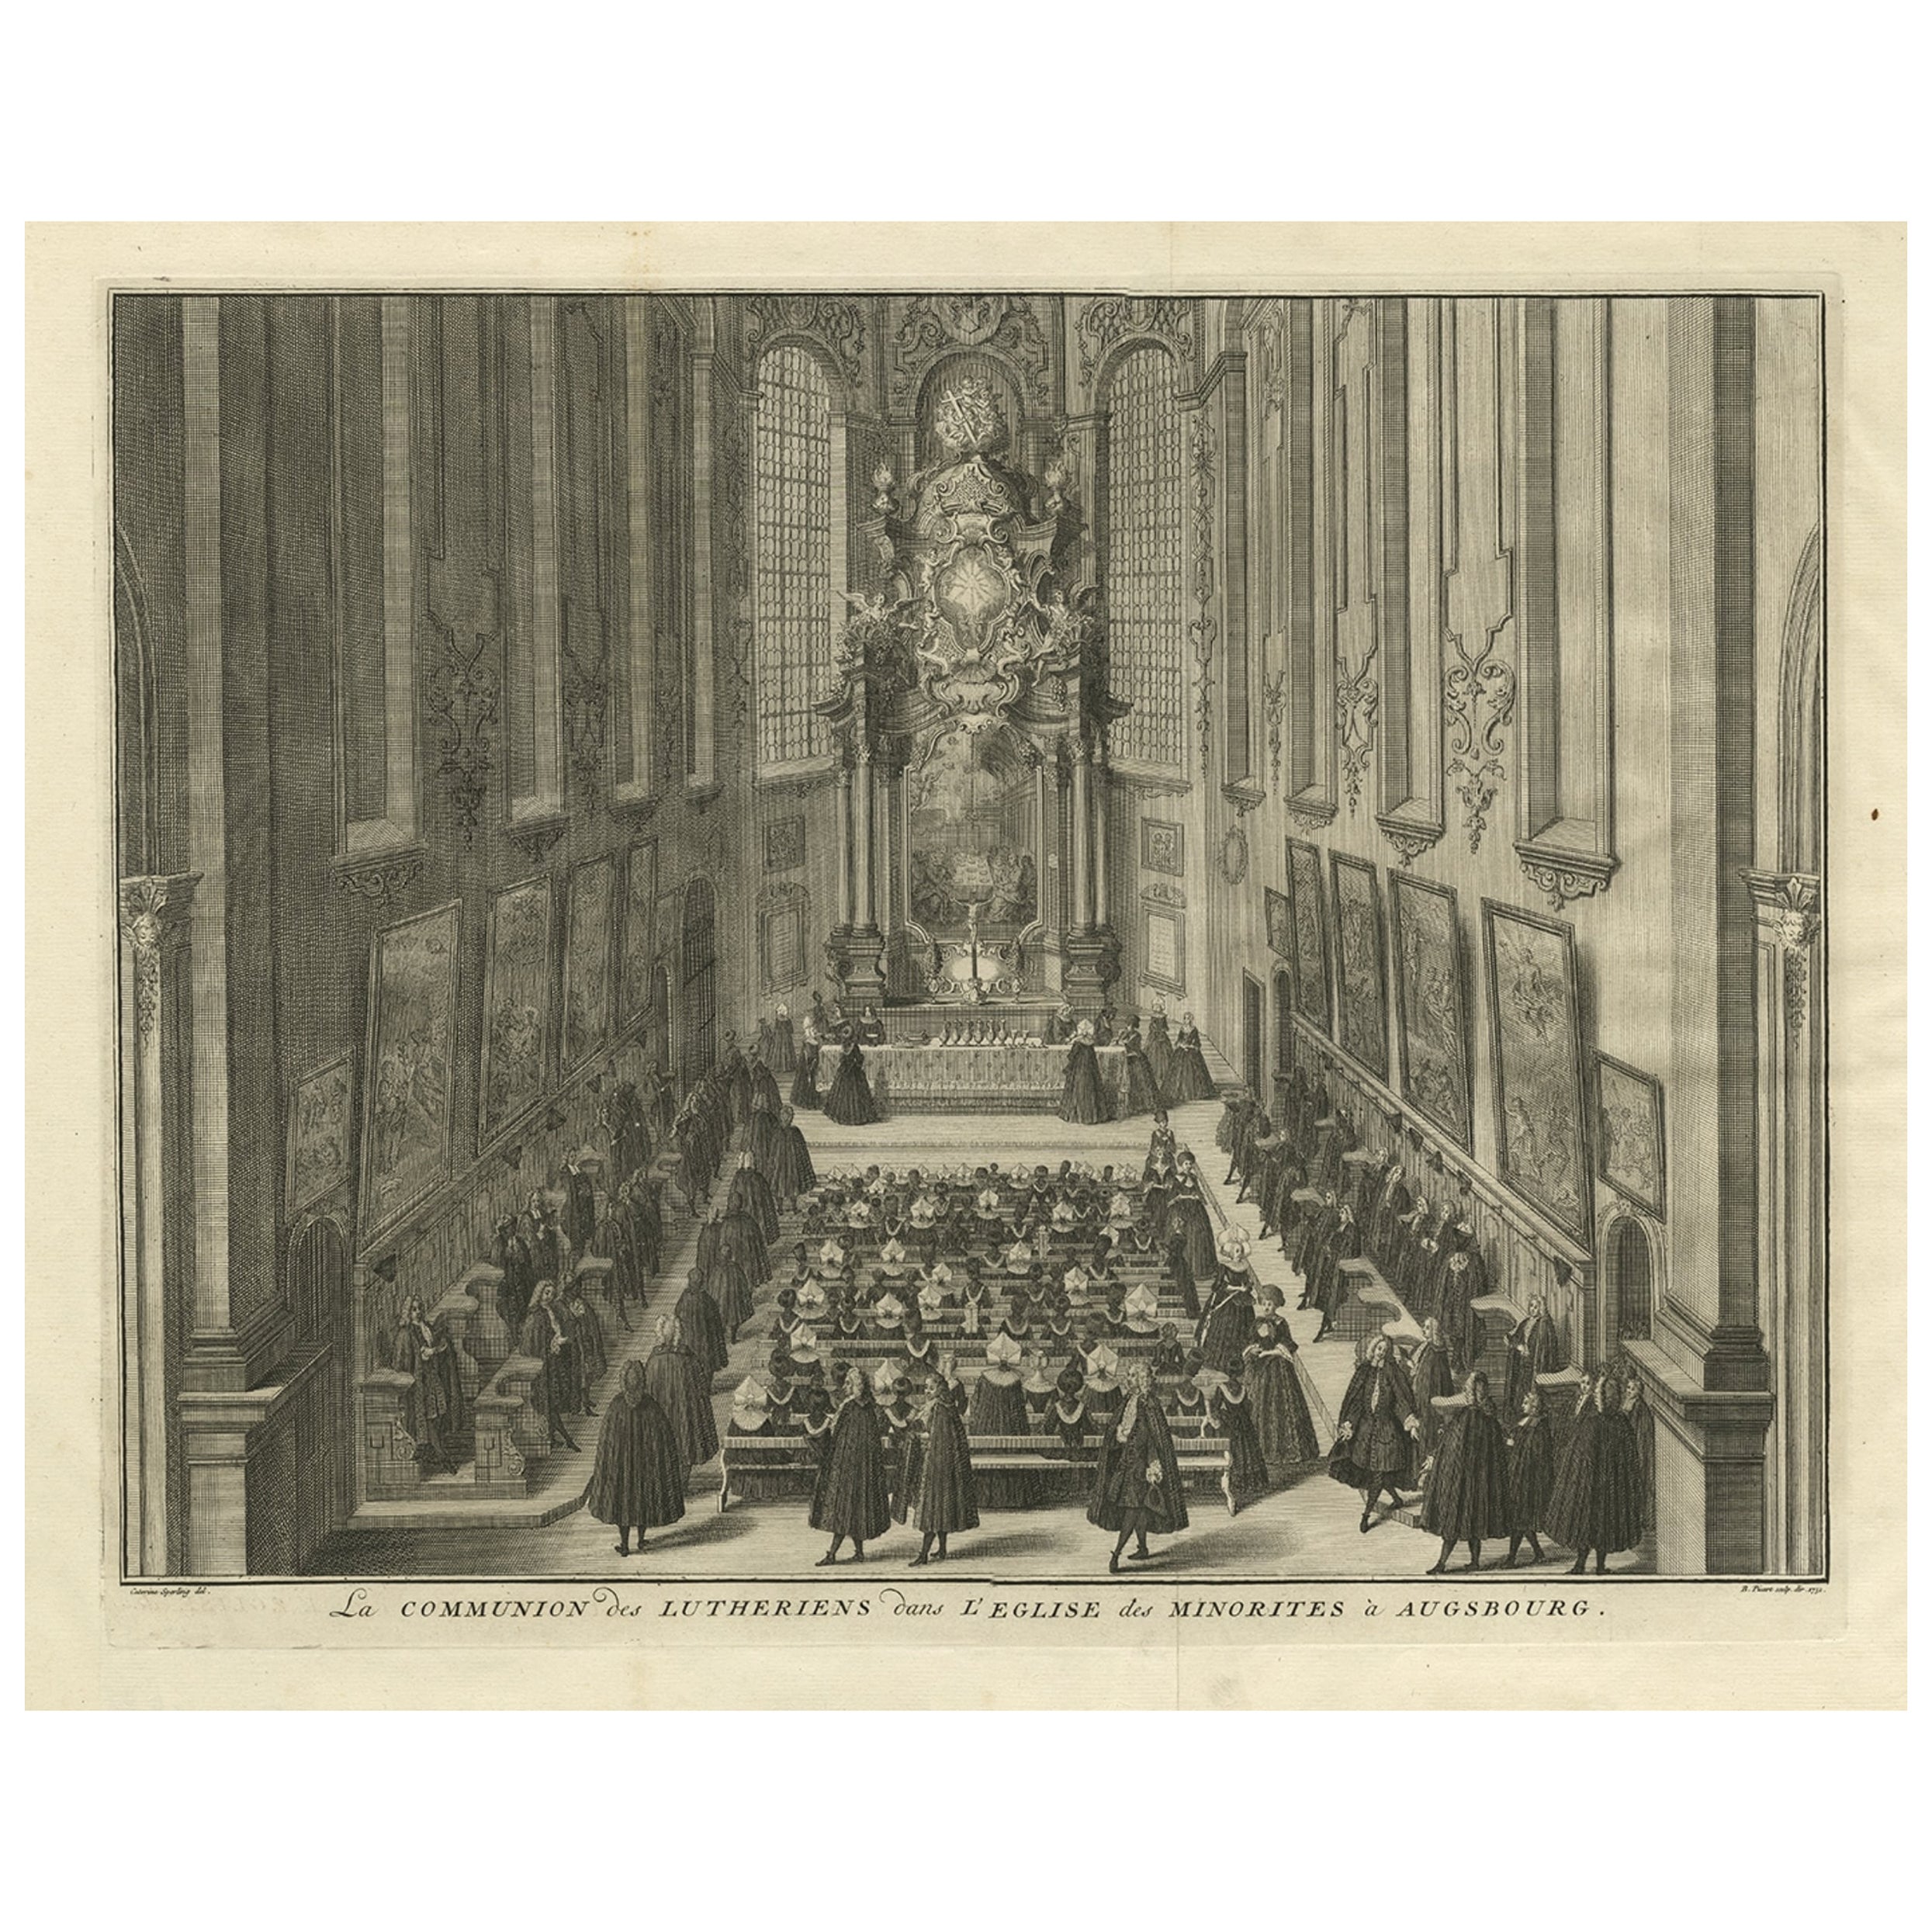 The Communion of the Lutherans in the Minorite Church in Augsburg, Germany, 1730